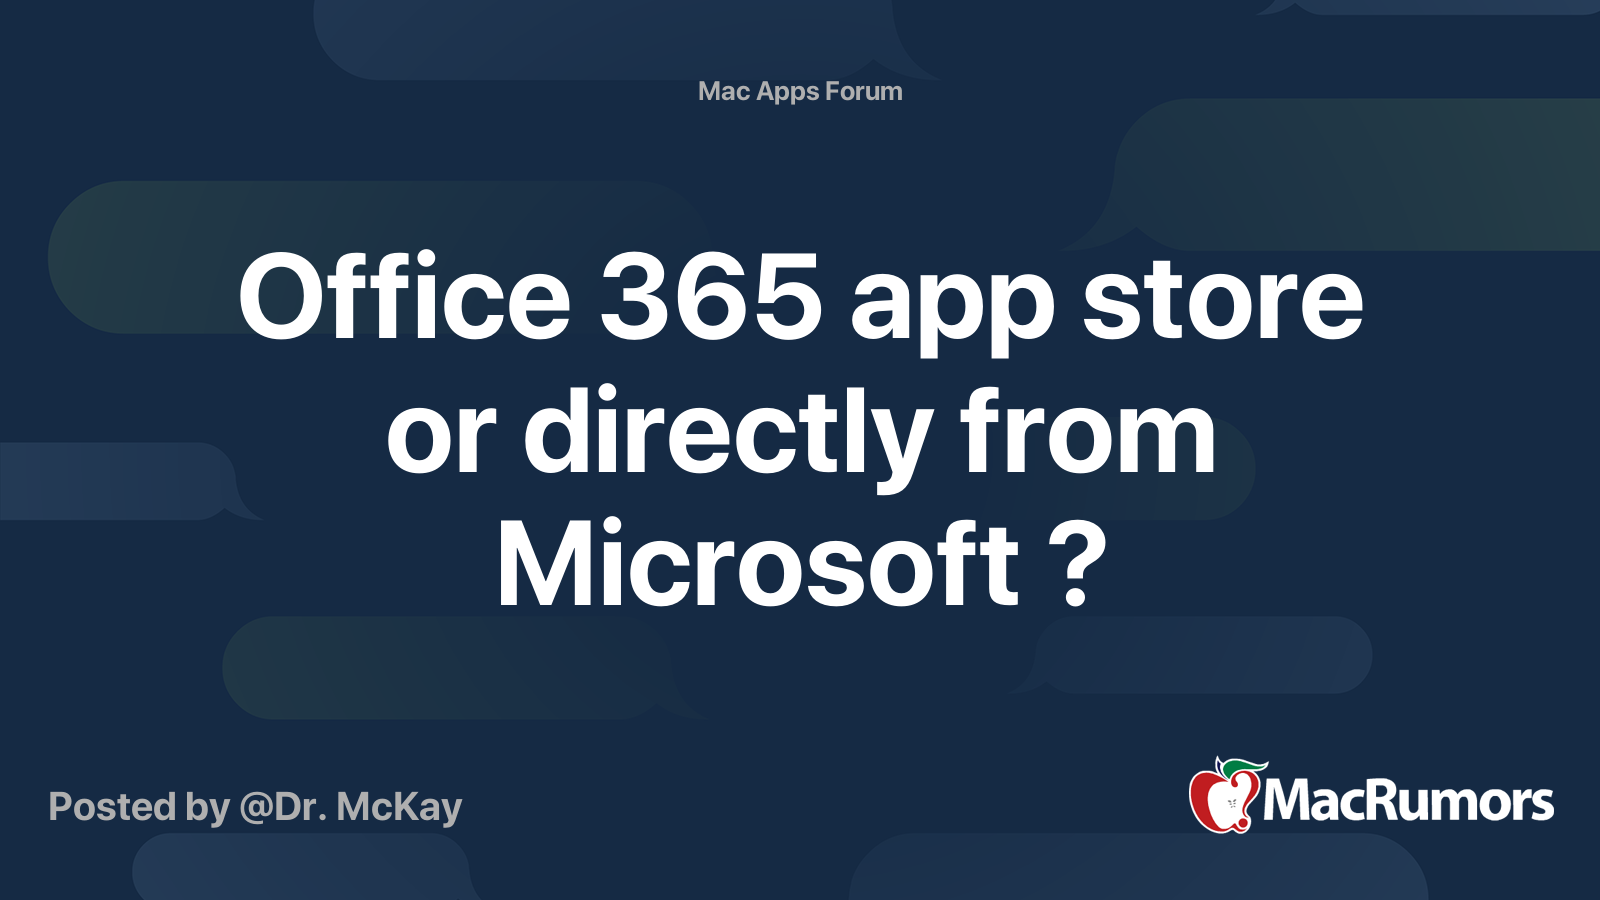 Office 365 for Mac is available on the Mac App Store